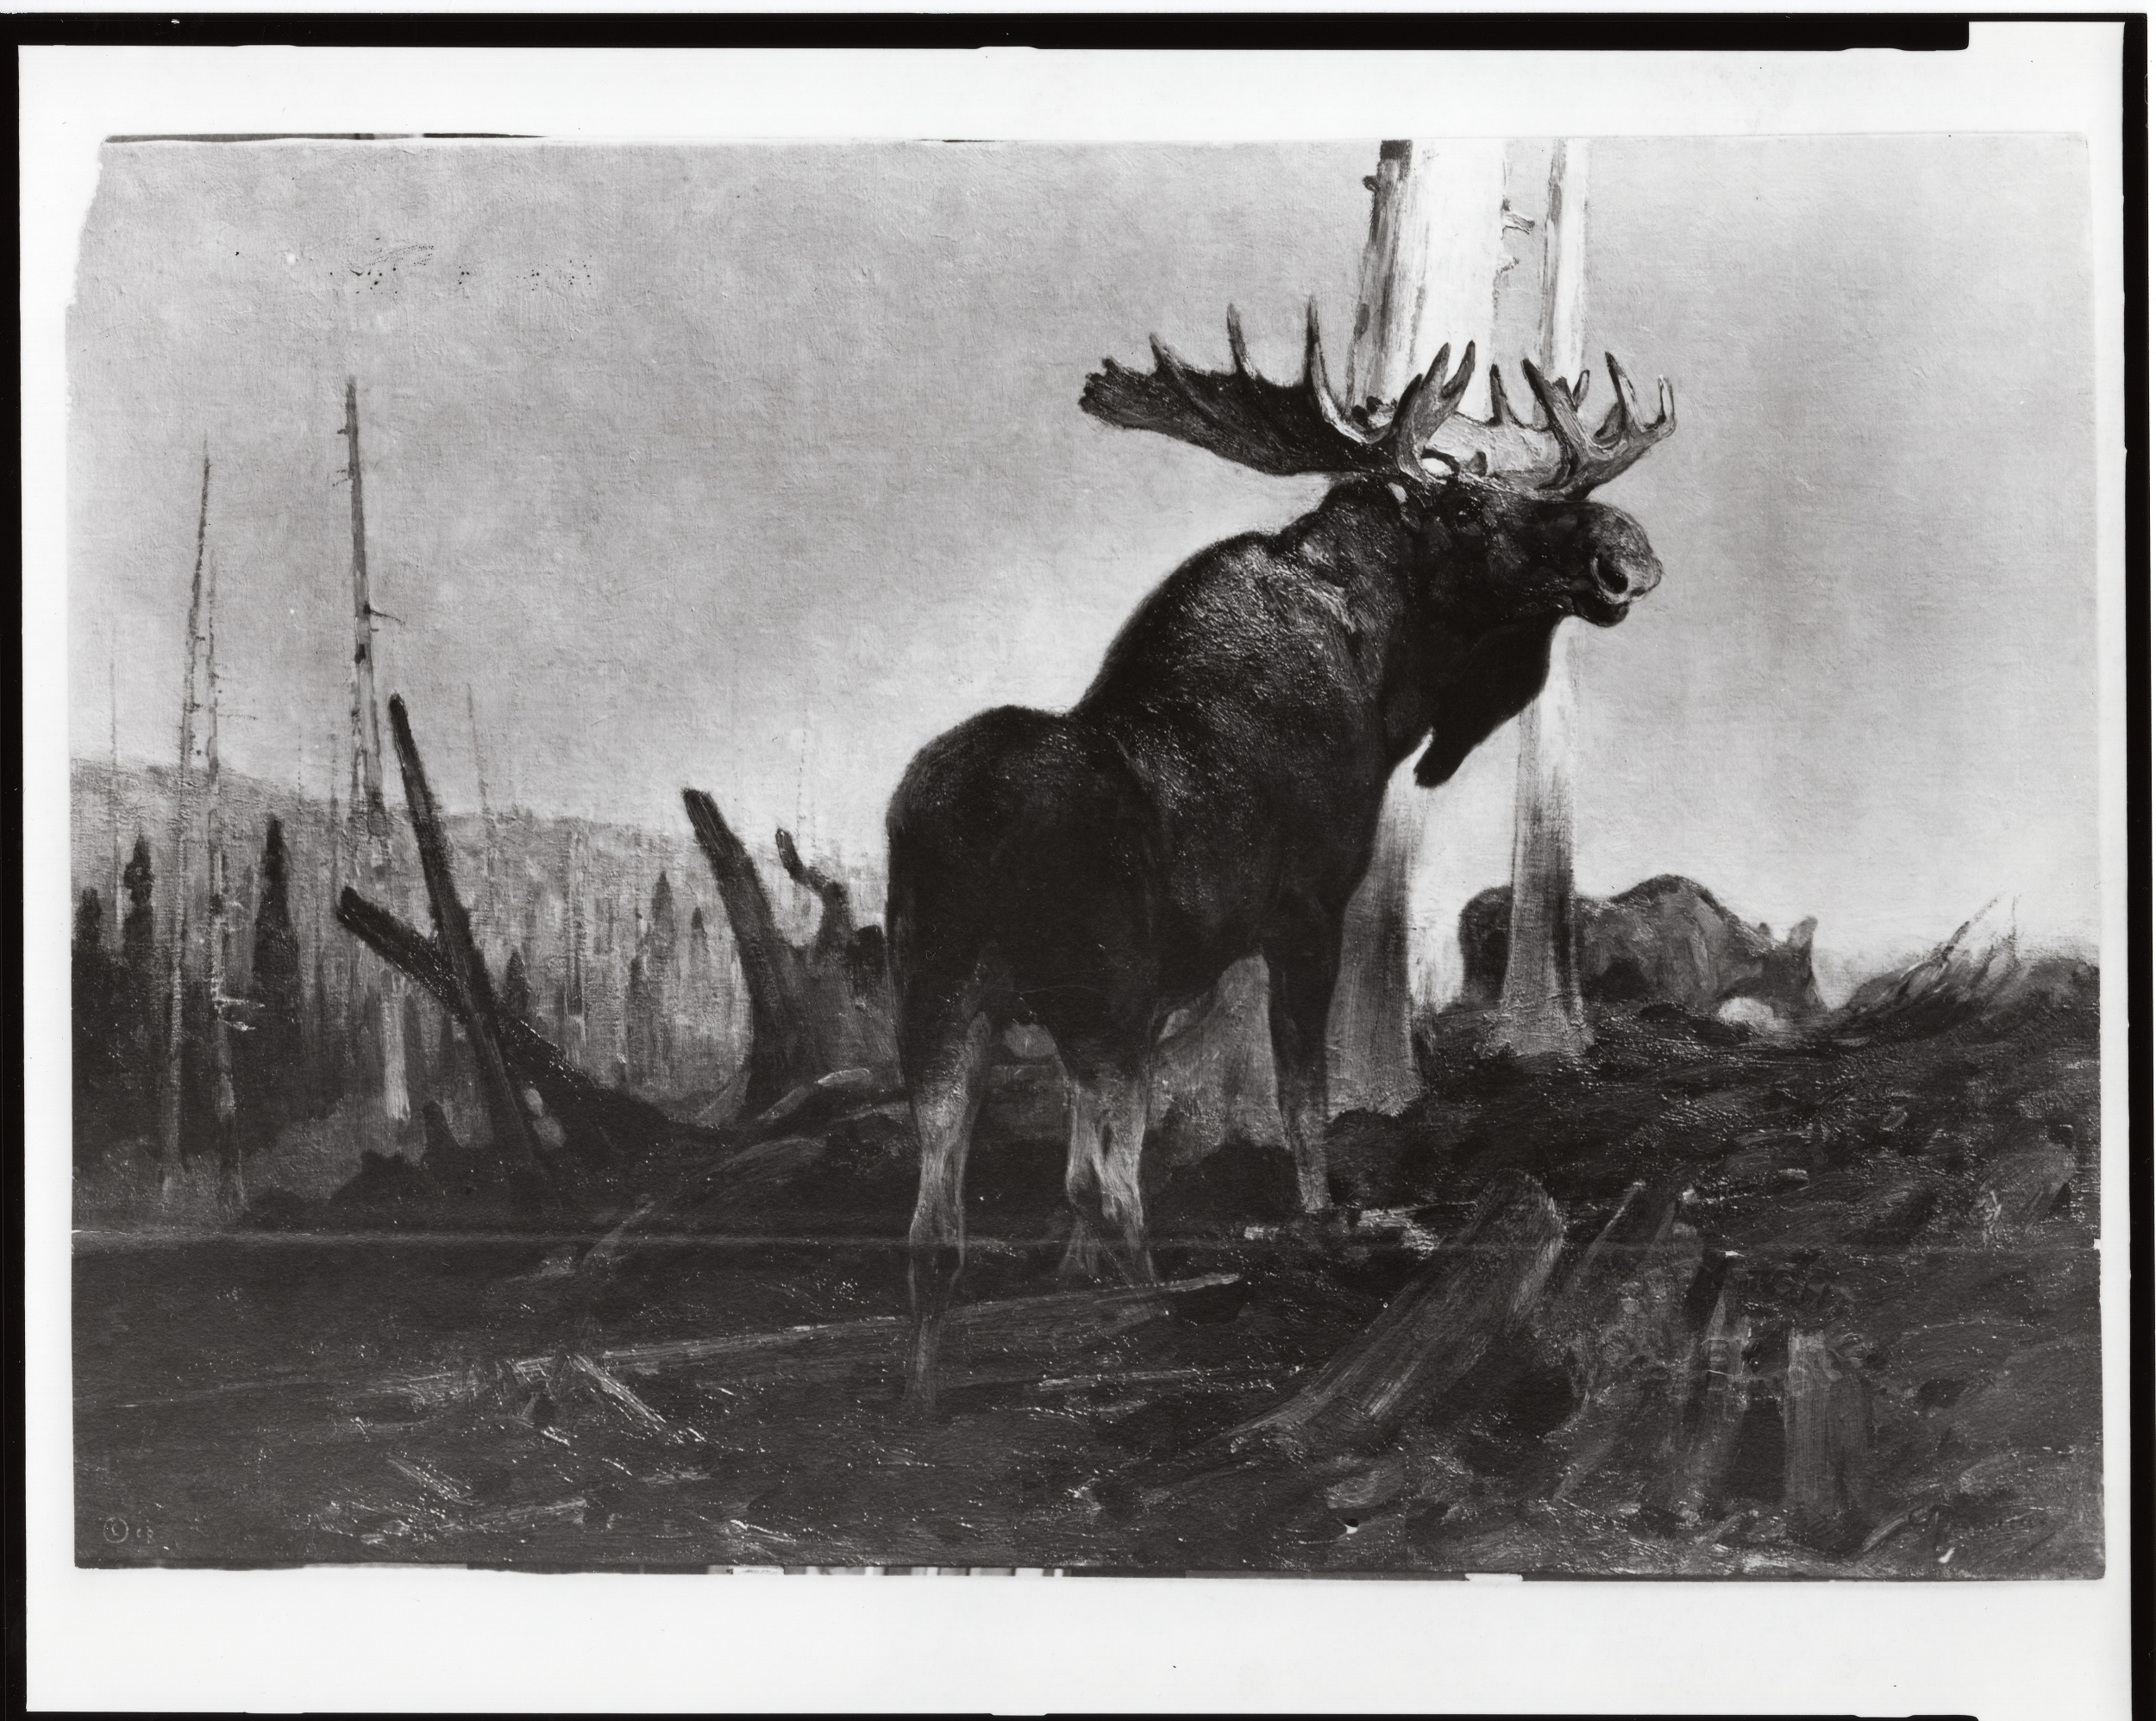 Black-and-white photograph of an oil painting of a moose with full antlers standing in a cleared field with bare tree trunks